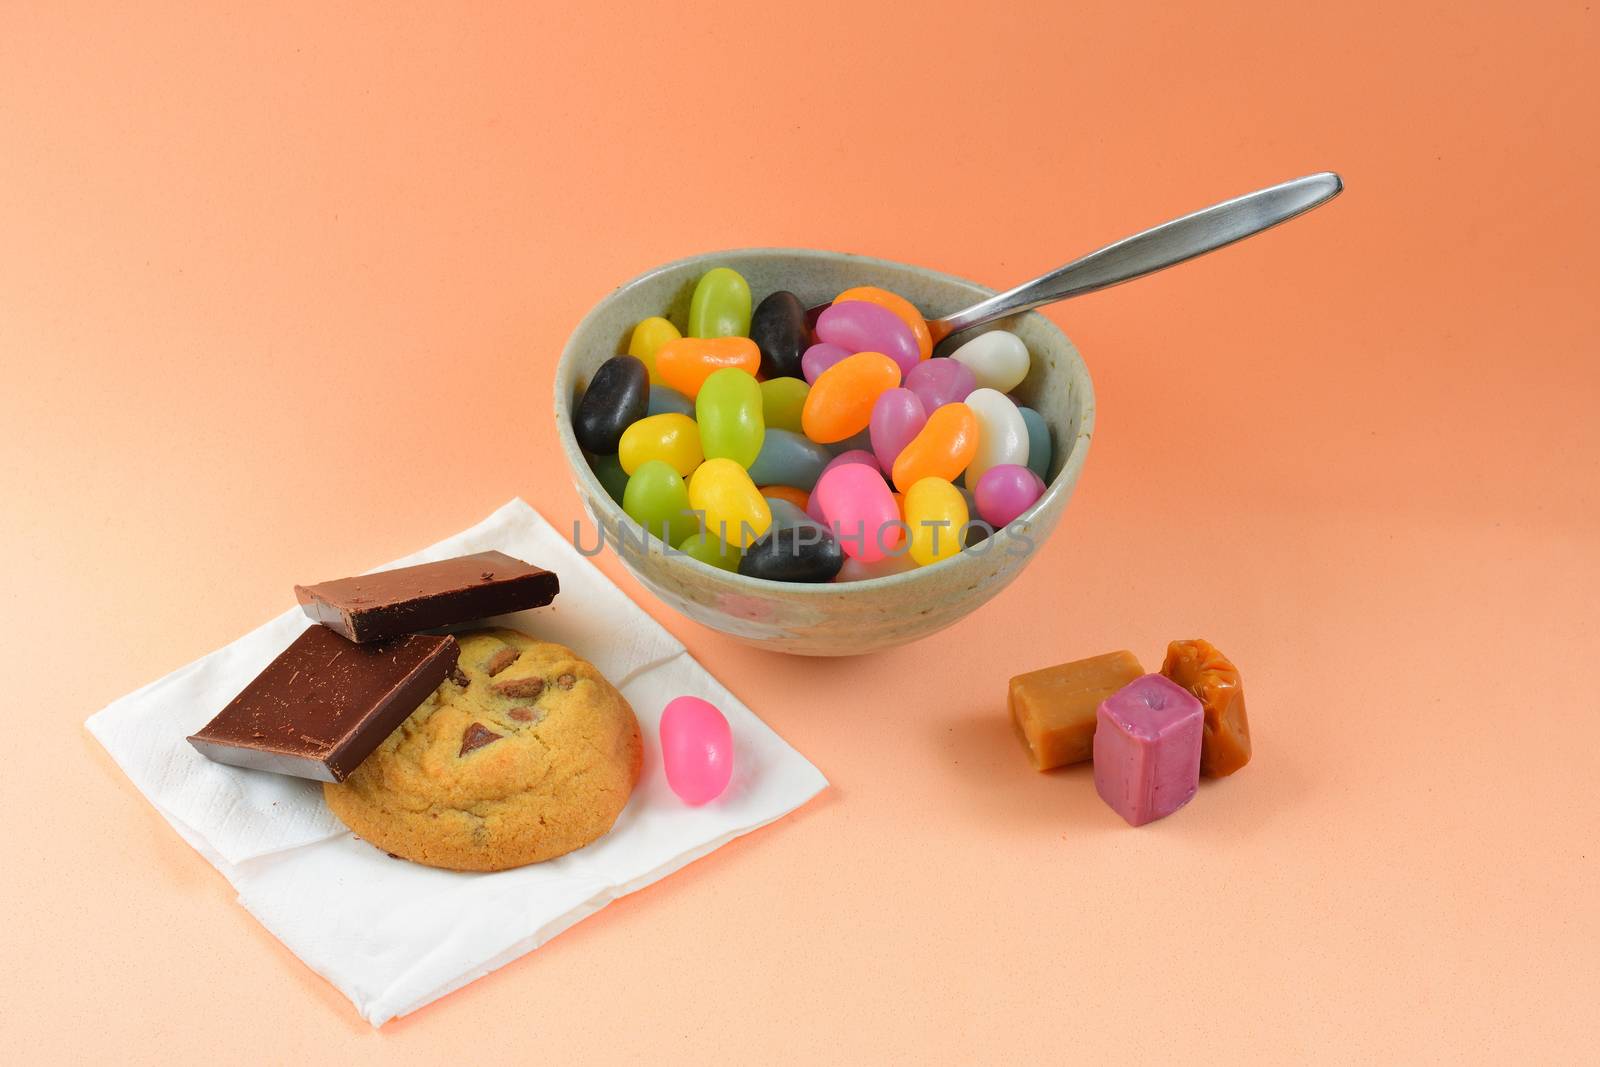 A close-up photo of a meal consisting of some colorful jelly beans, mixed sweets and cookies. Concept of unhealthy diet by Marshalkina